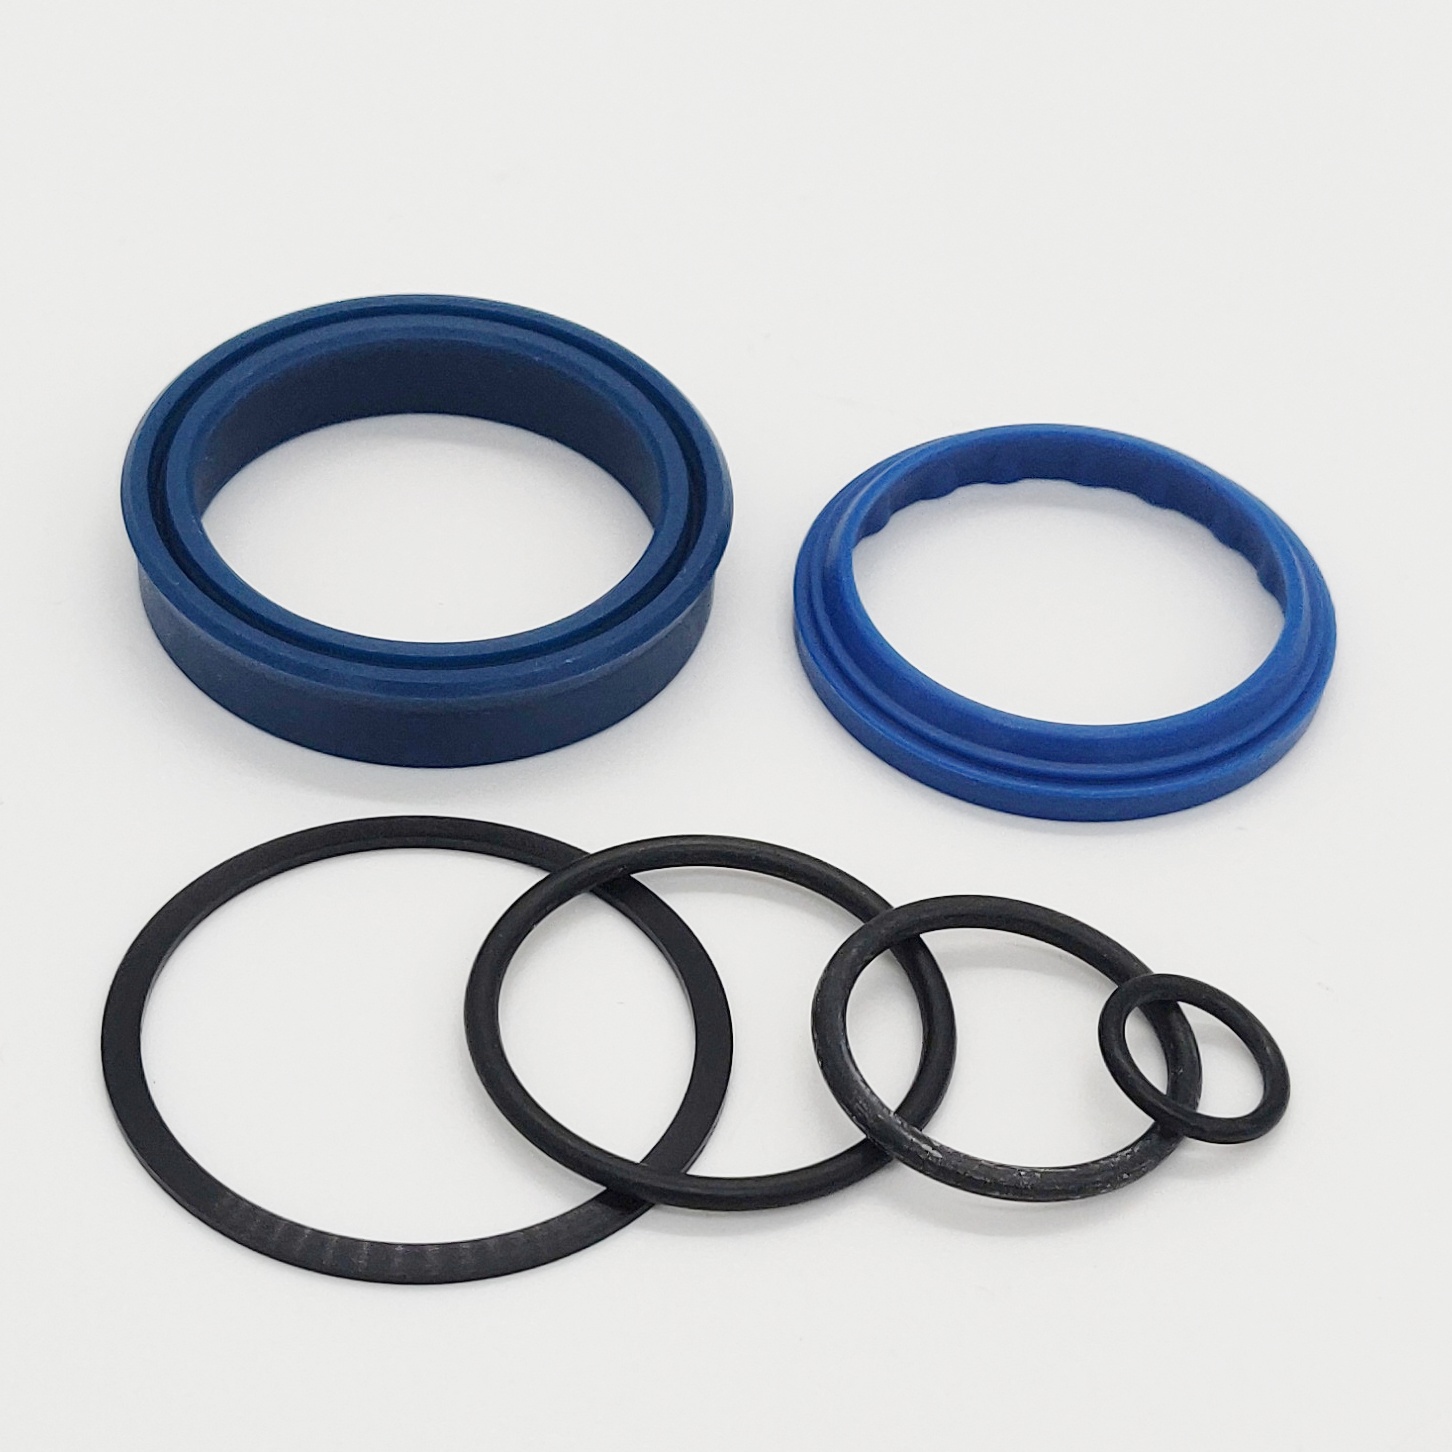 LIFT KING FORKLIFT LK12000 ACTUATING CYLINDER SEAL KIT MA12411-A  FT12LC 